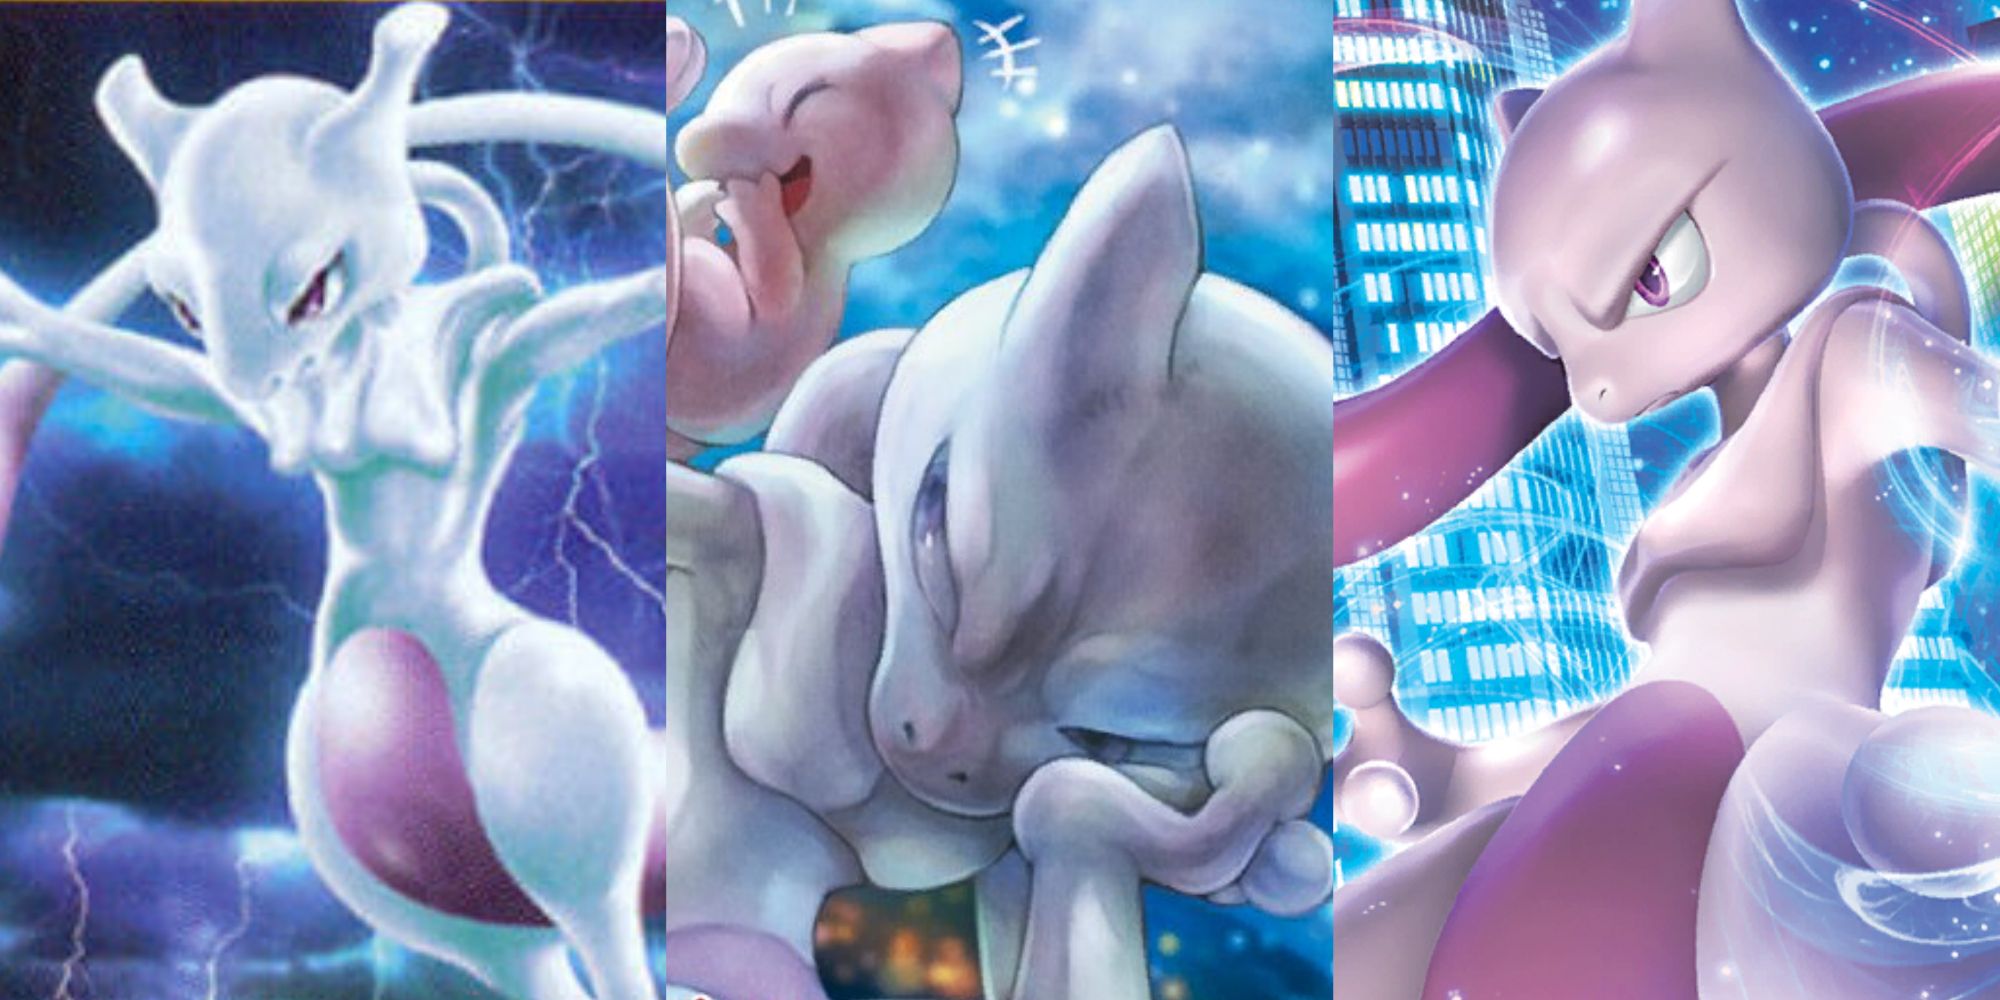 Pokemon - Mew and Mewtwo with 2 poses